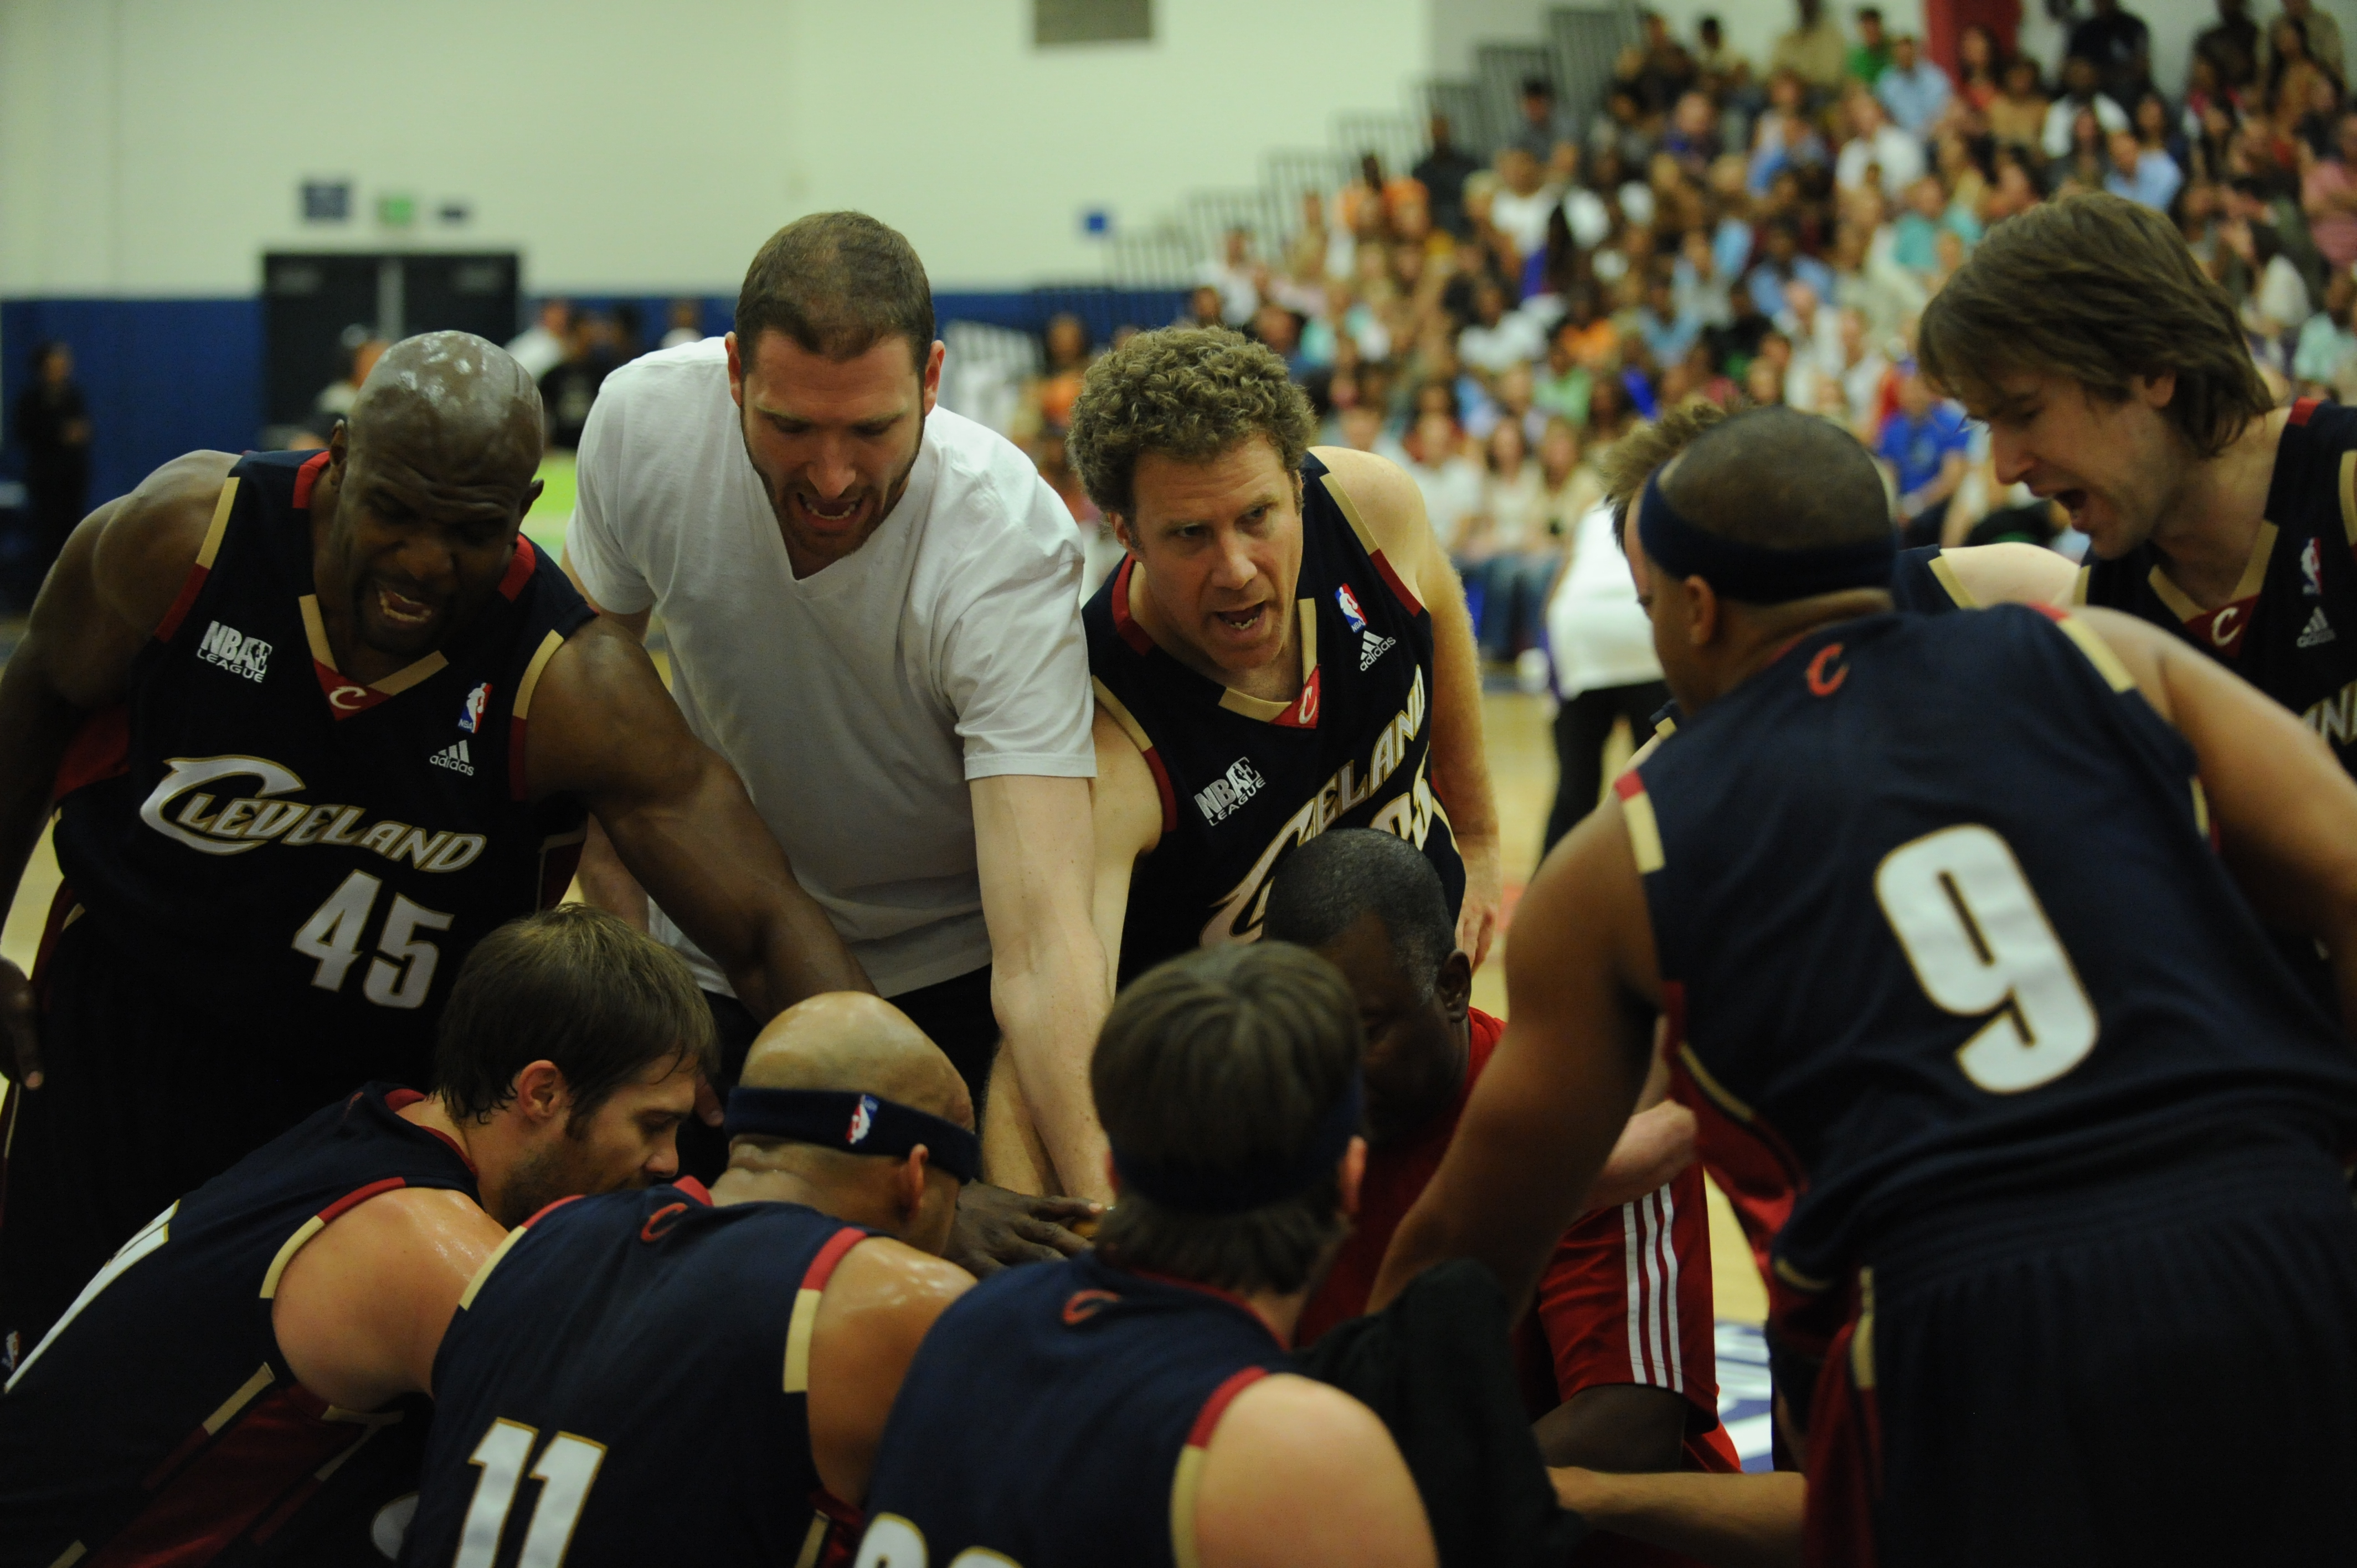 Terry Crews, Peter Cornell, Will Ferrell, Michael Westphal, Donald Faison, Josh Braaten, James Lesure and Geoff Stults break from a huddle in the NBAE League championship game